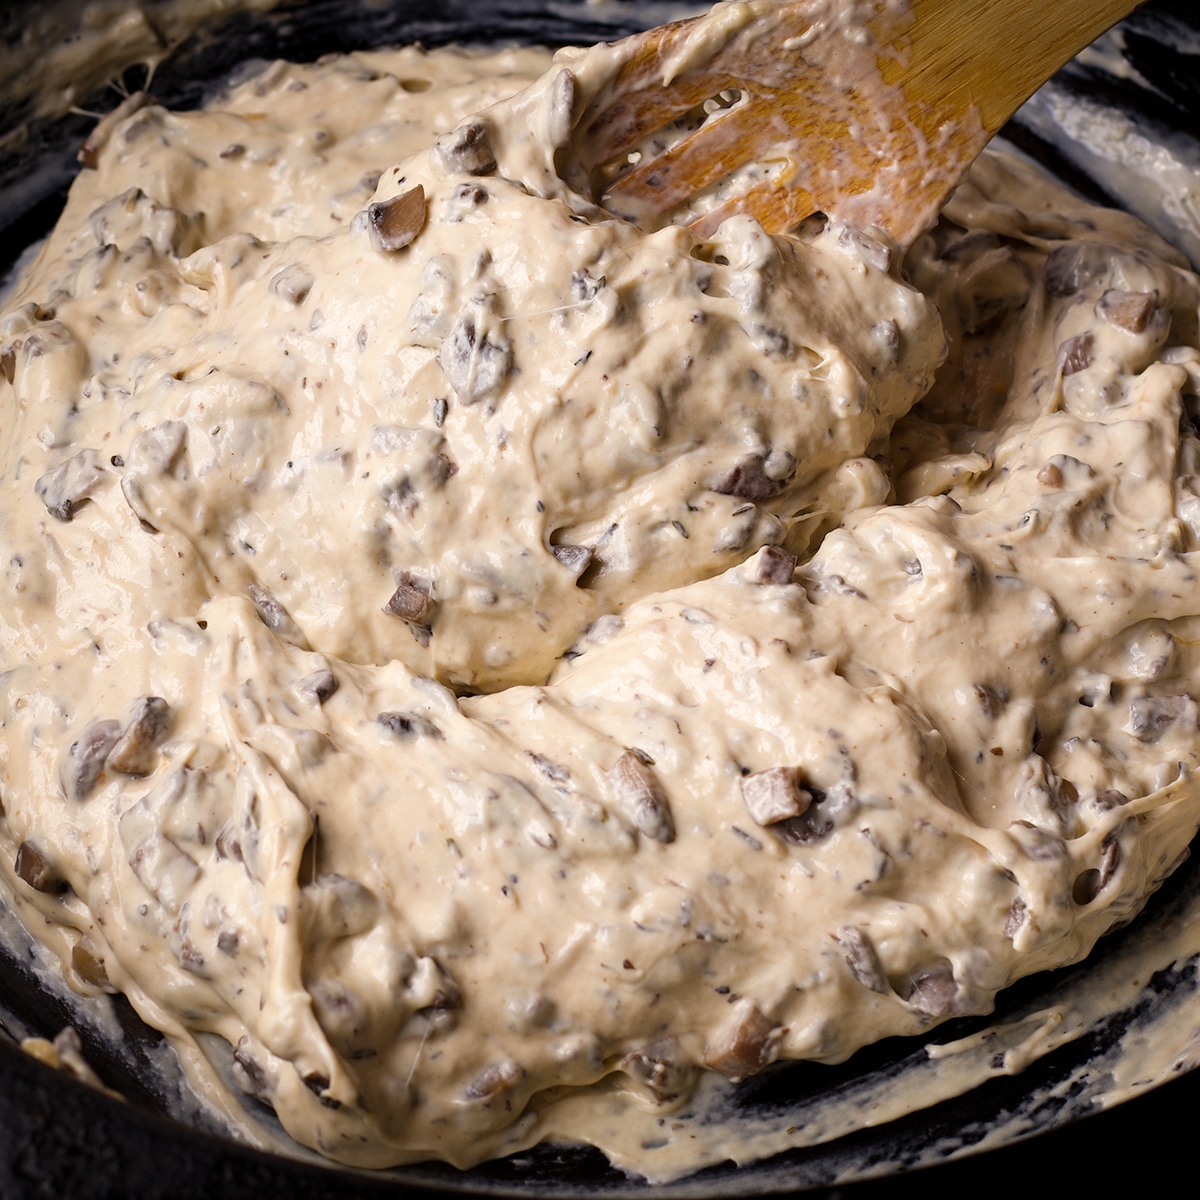 Someone using a wooden spoon to stir cream cheese into mushroom dip.